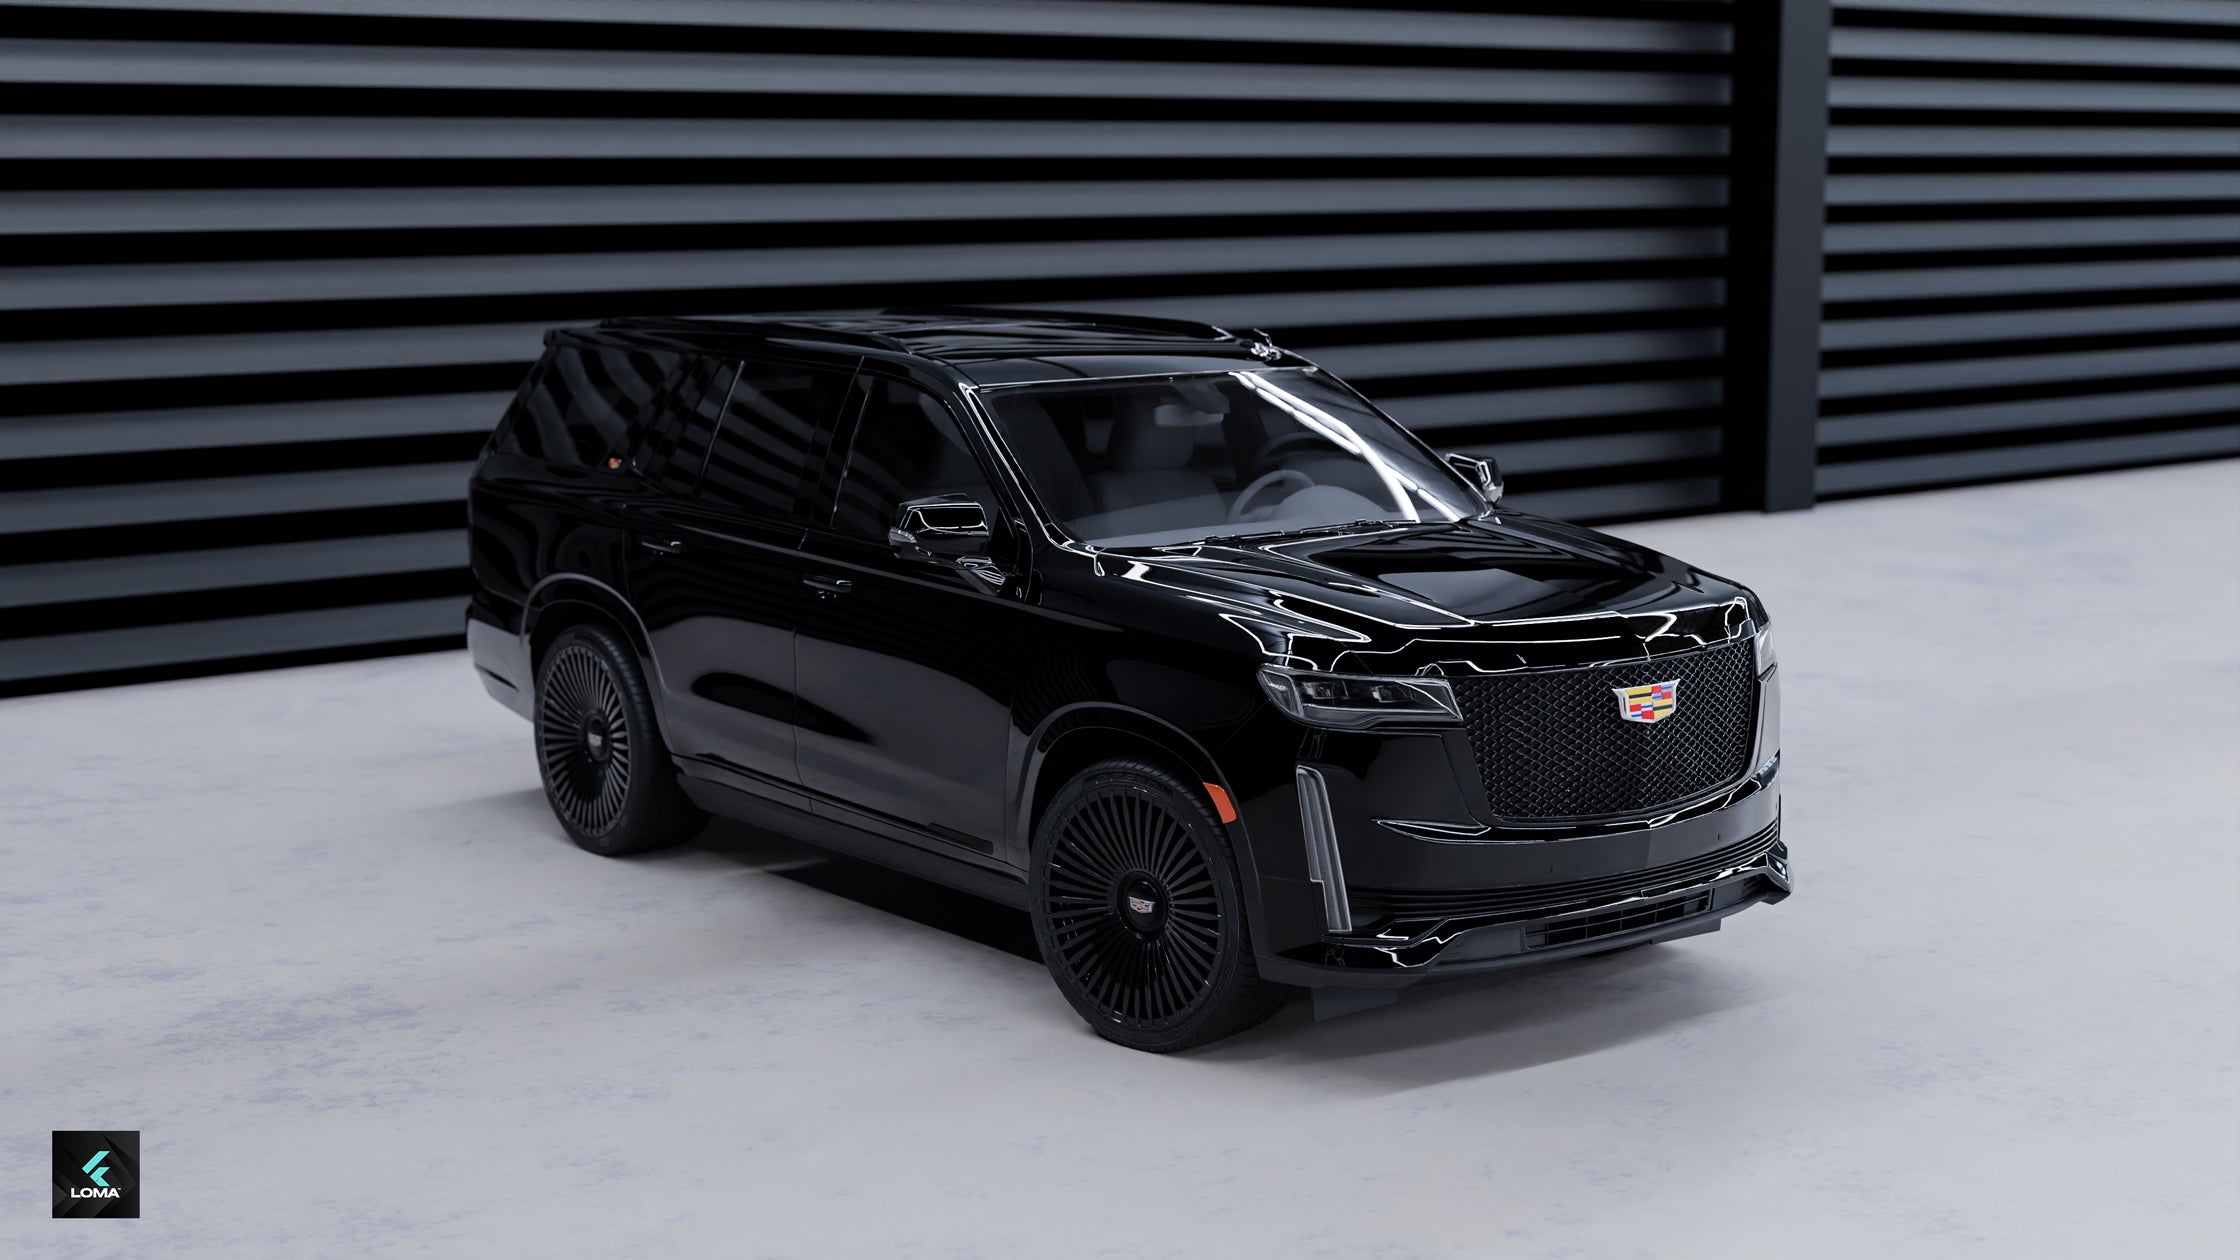 2023-Cadillac-Escalade-with-LOMA-Forged-Specter-Custom-Wheels-24-Inch-rims-9